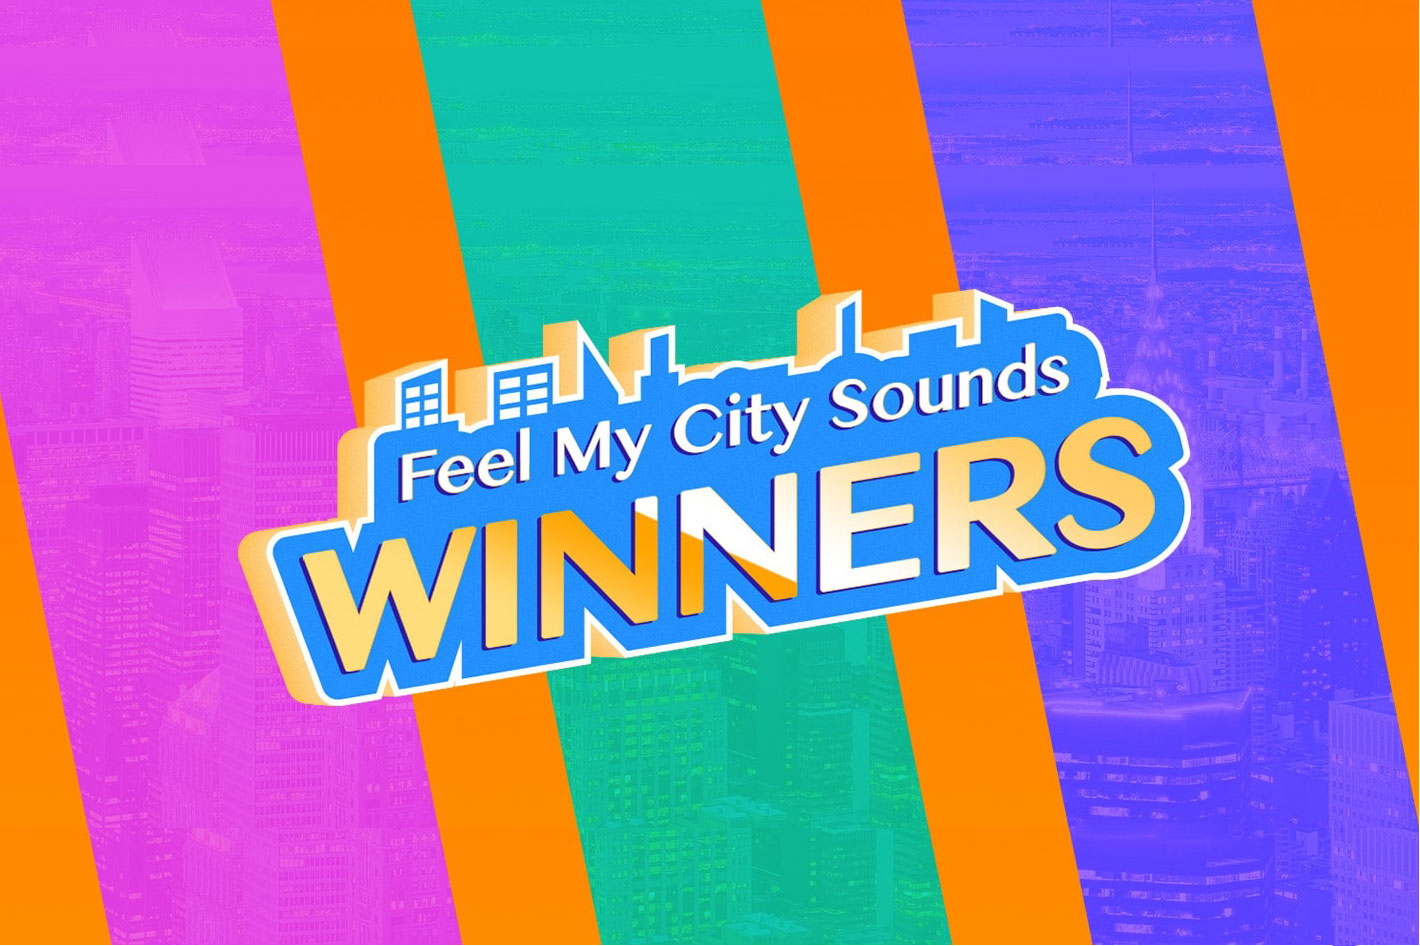 Feel My City Sounds short film contest: the winners